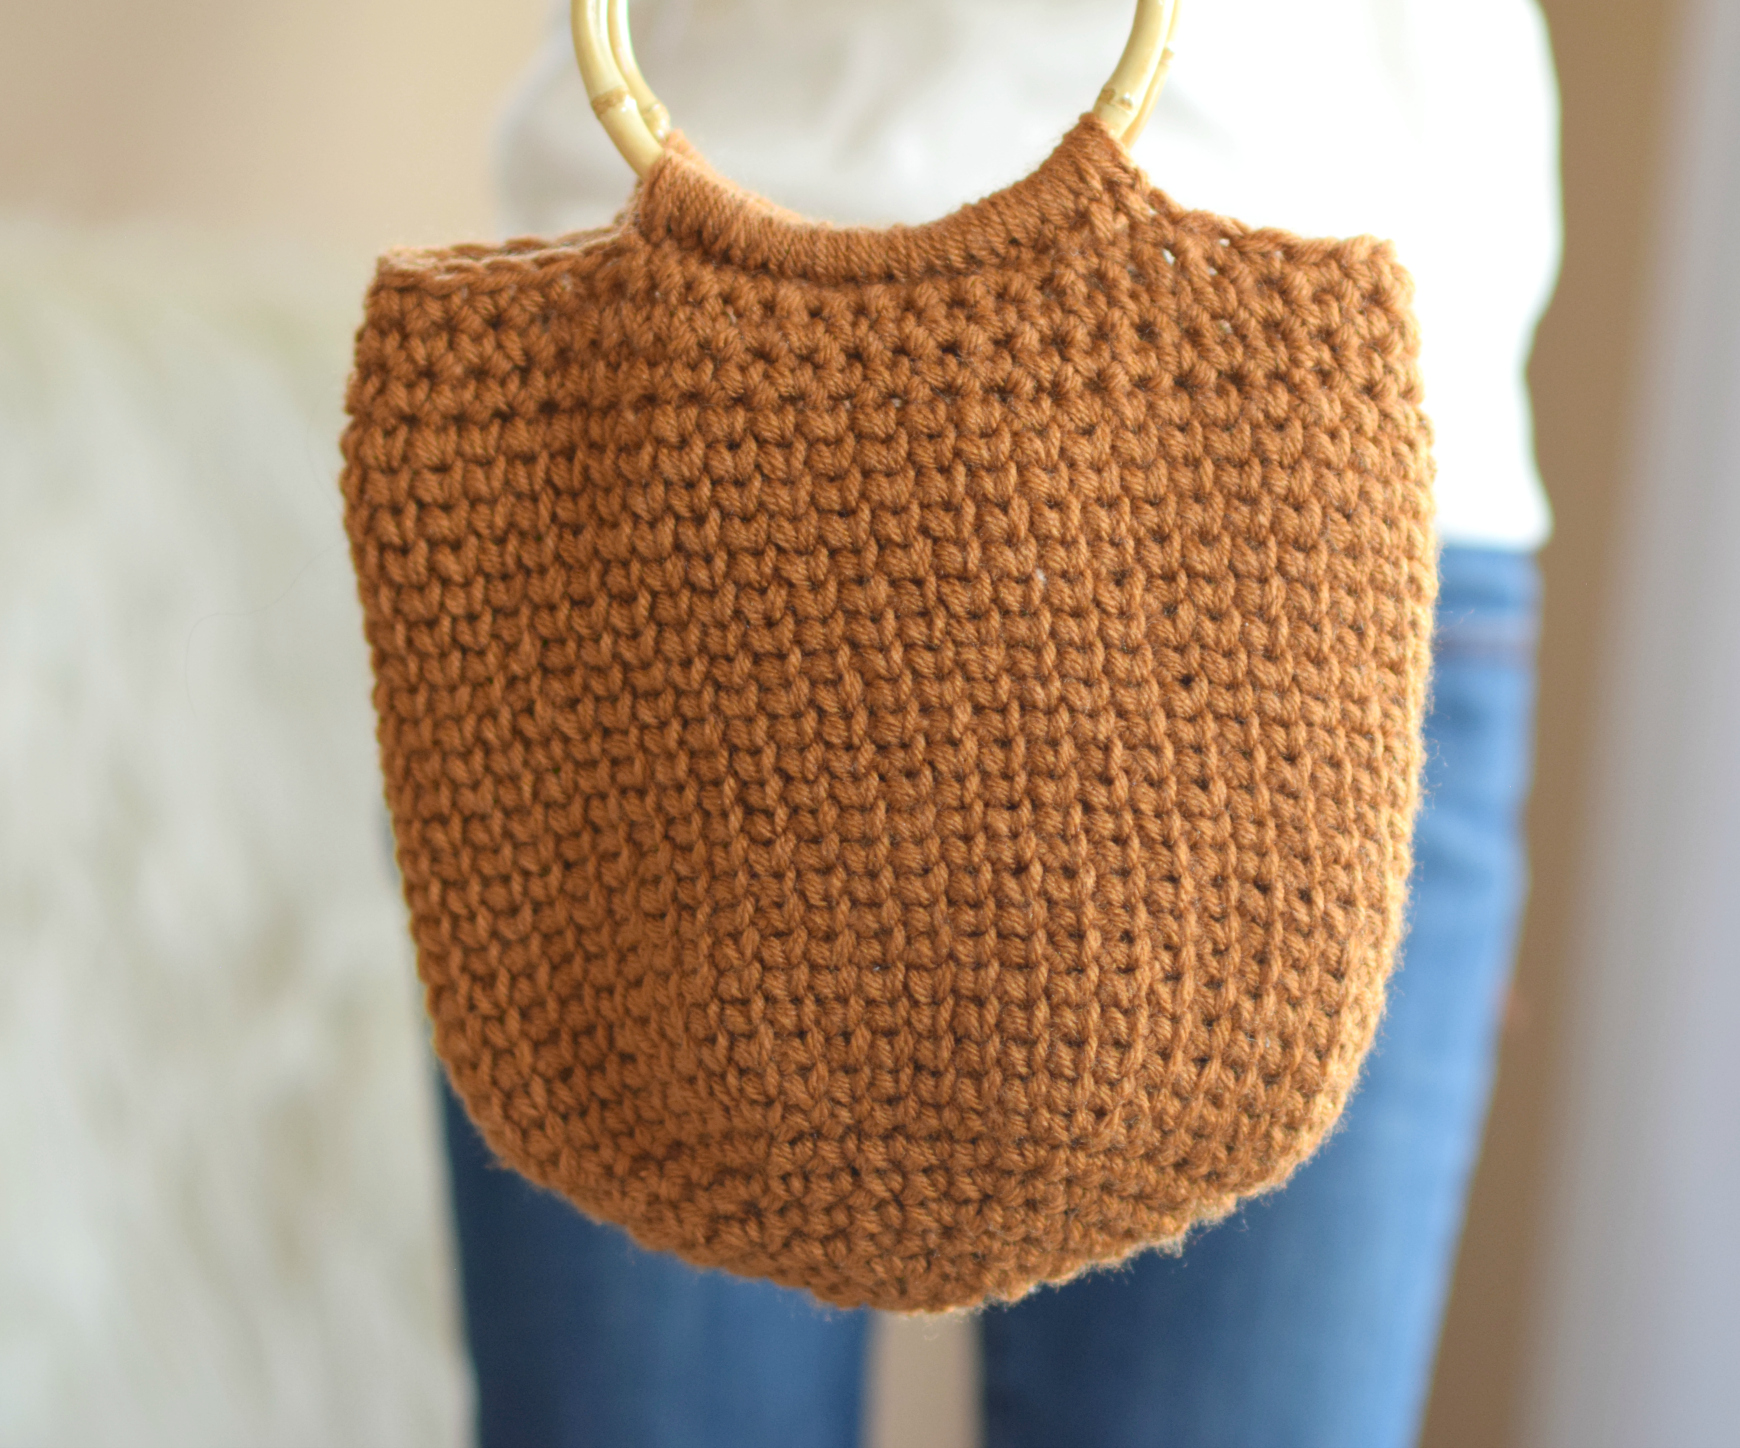 Bohemian Fringed Crochet Bag - Free Purse Pattern with Leather Straps